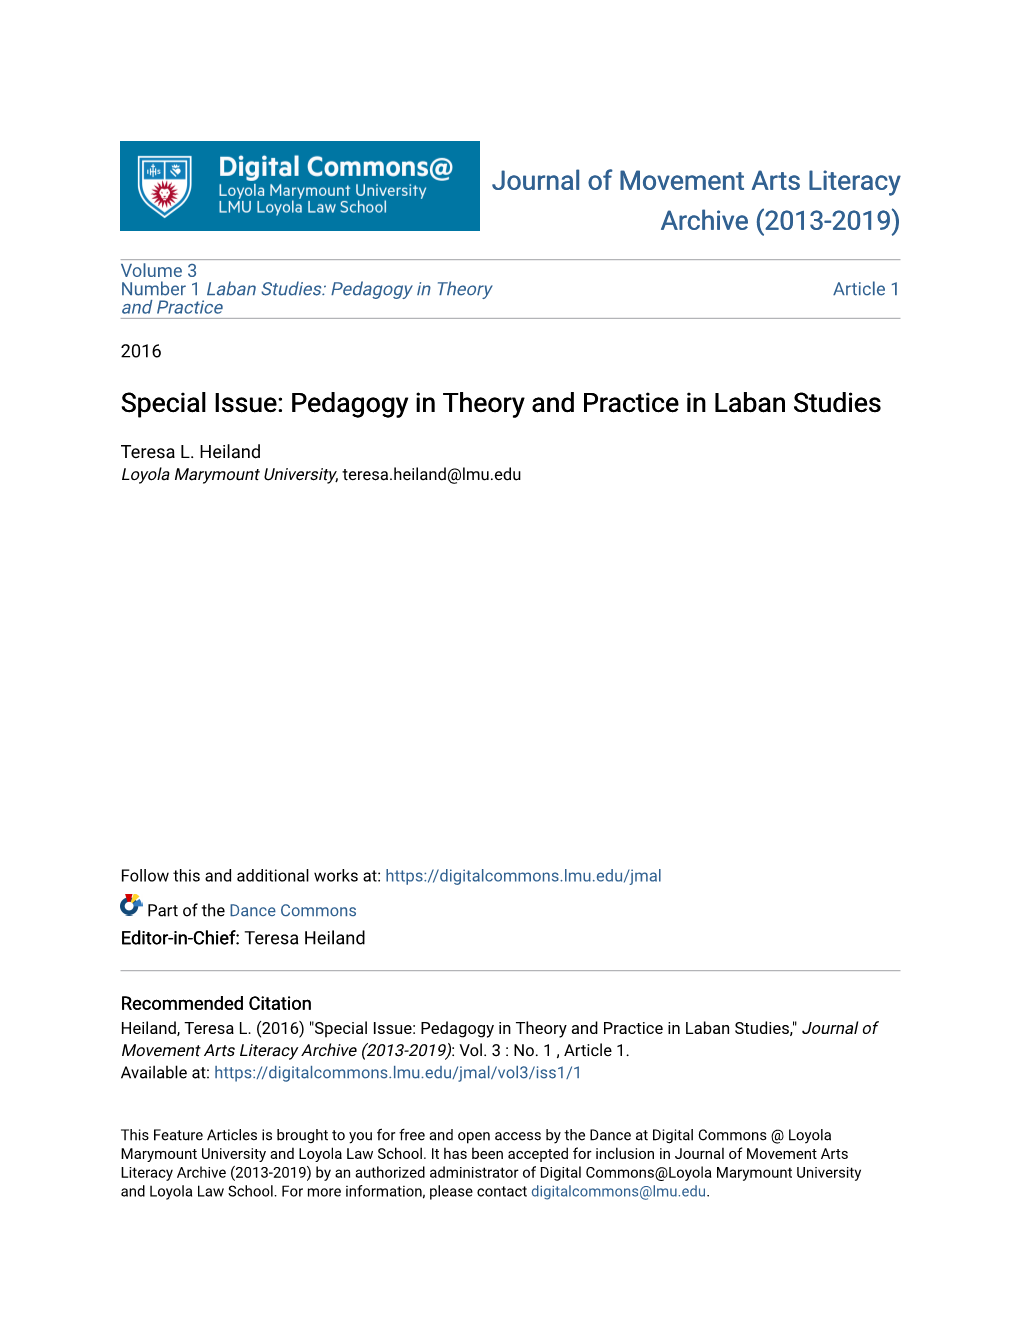 Pedagogy in Theory and Practice in Laban Studies